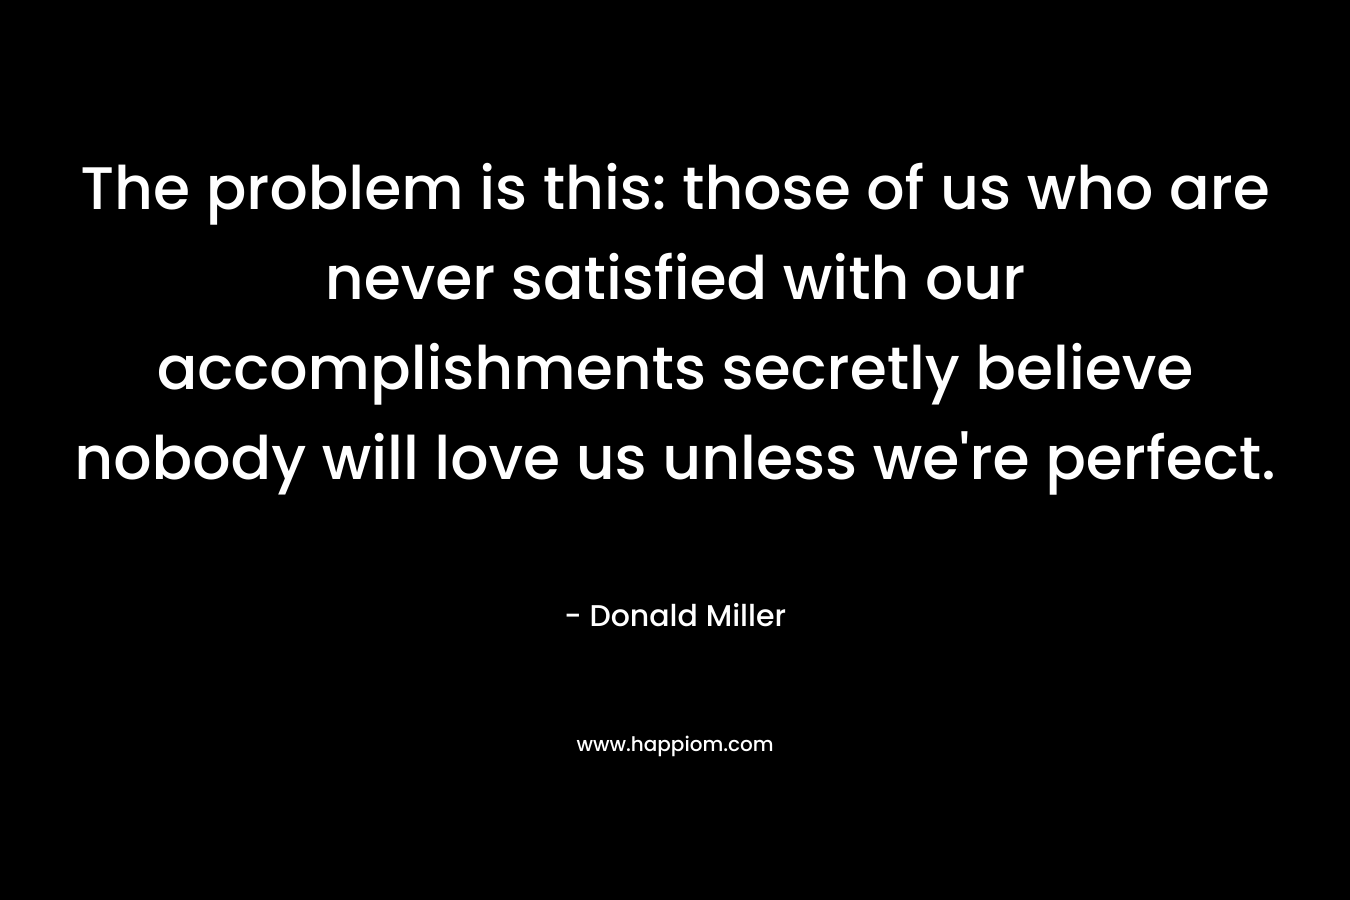 The problem is this: those of us who are never satisfied with our accomplishments secretly believe nobody will love us unless we're perfect.